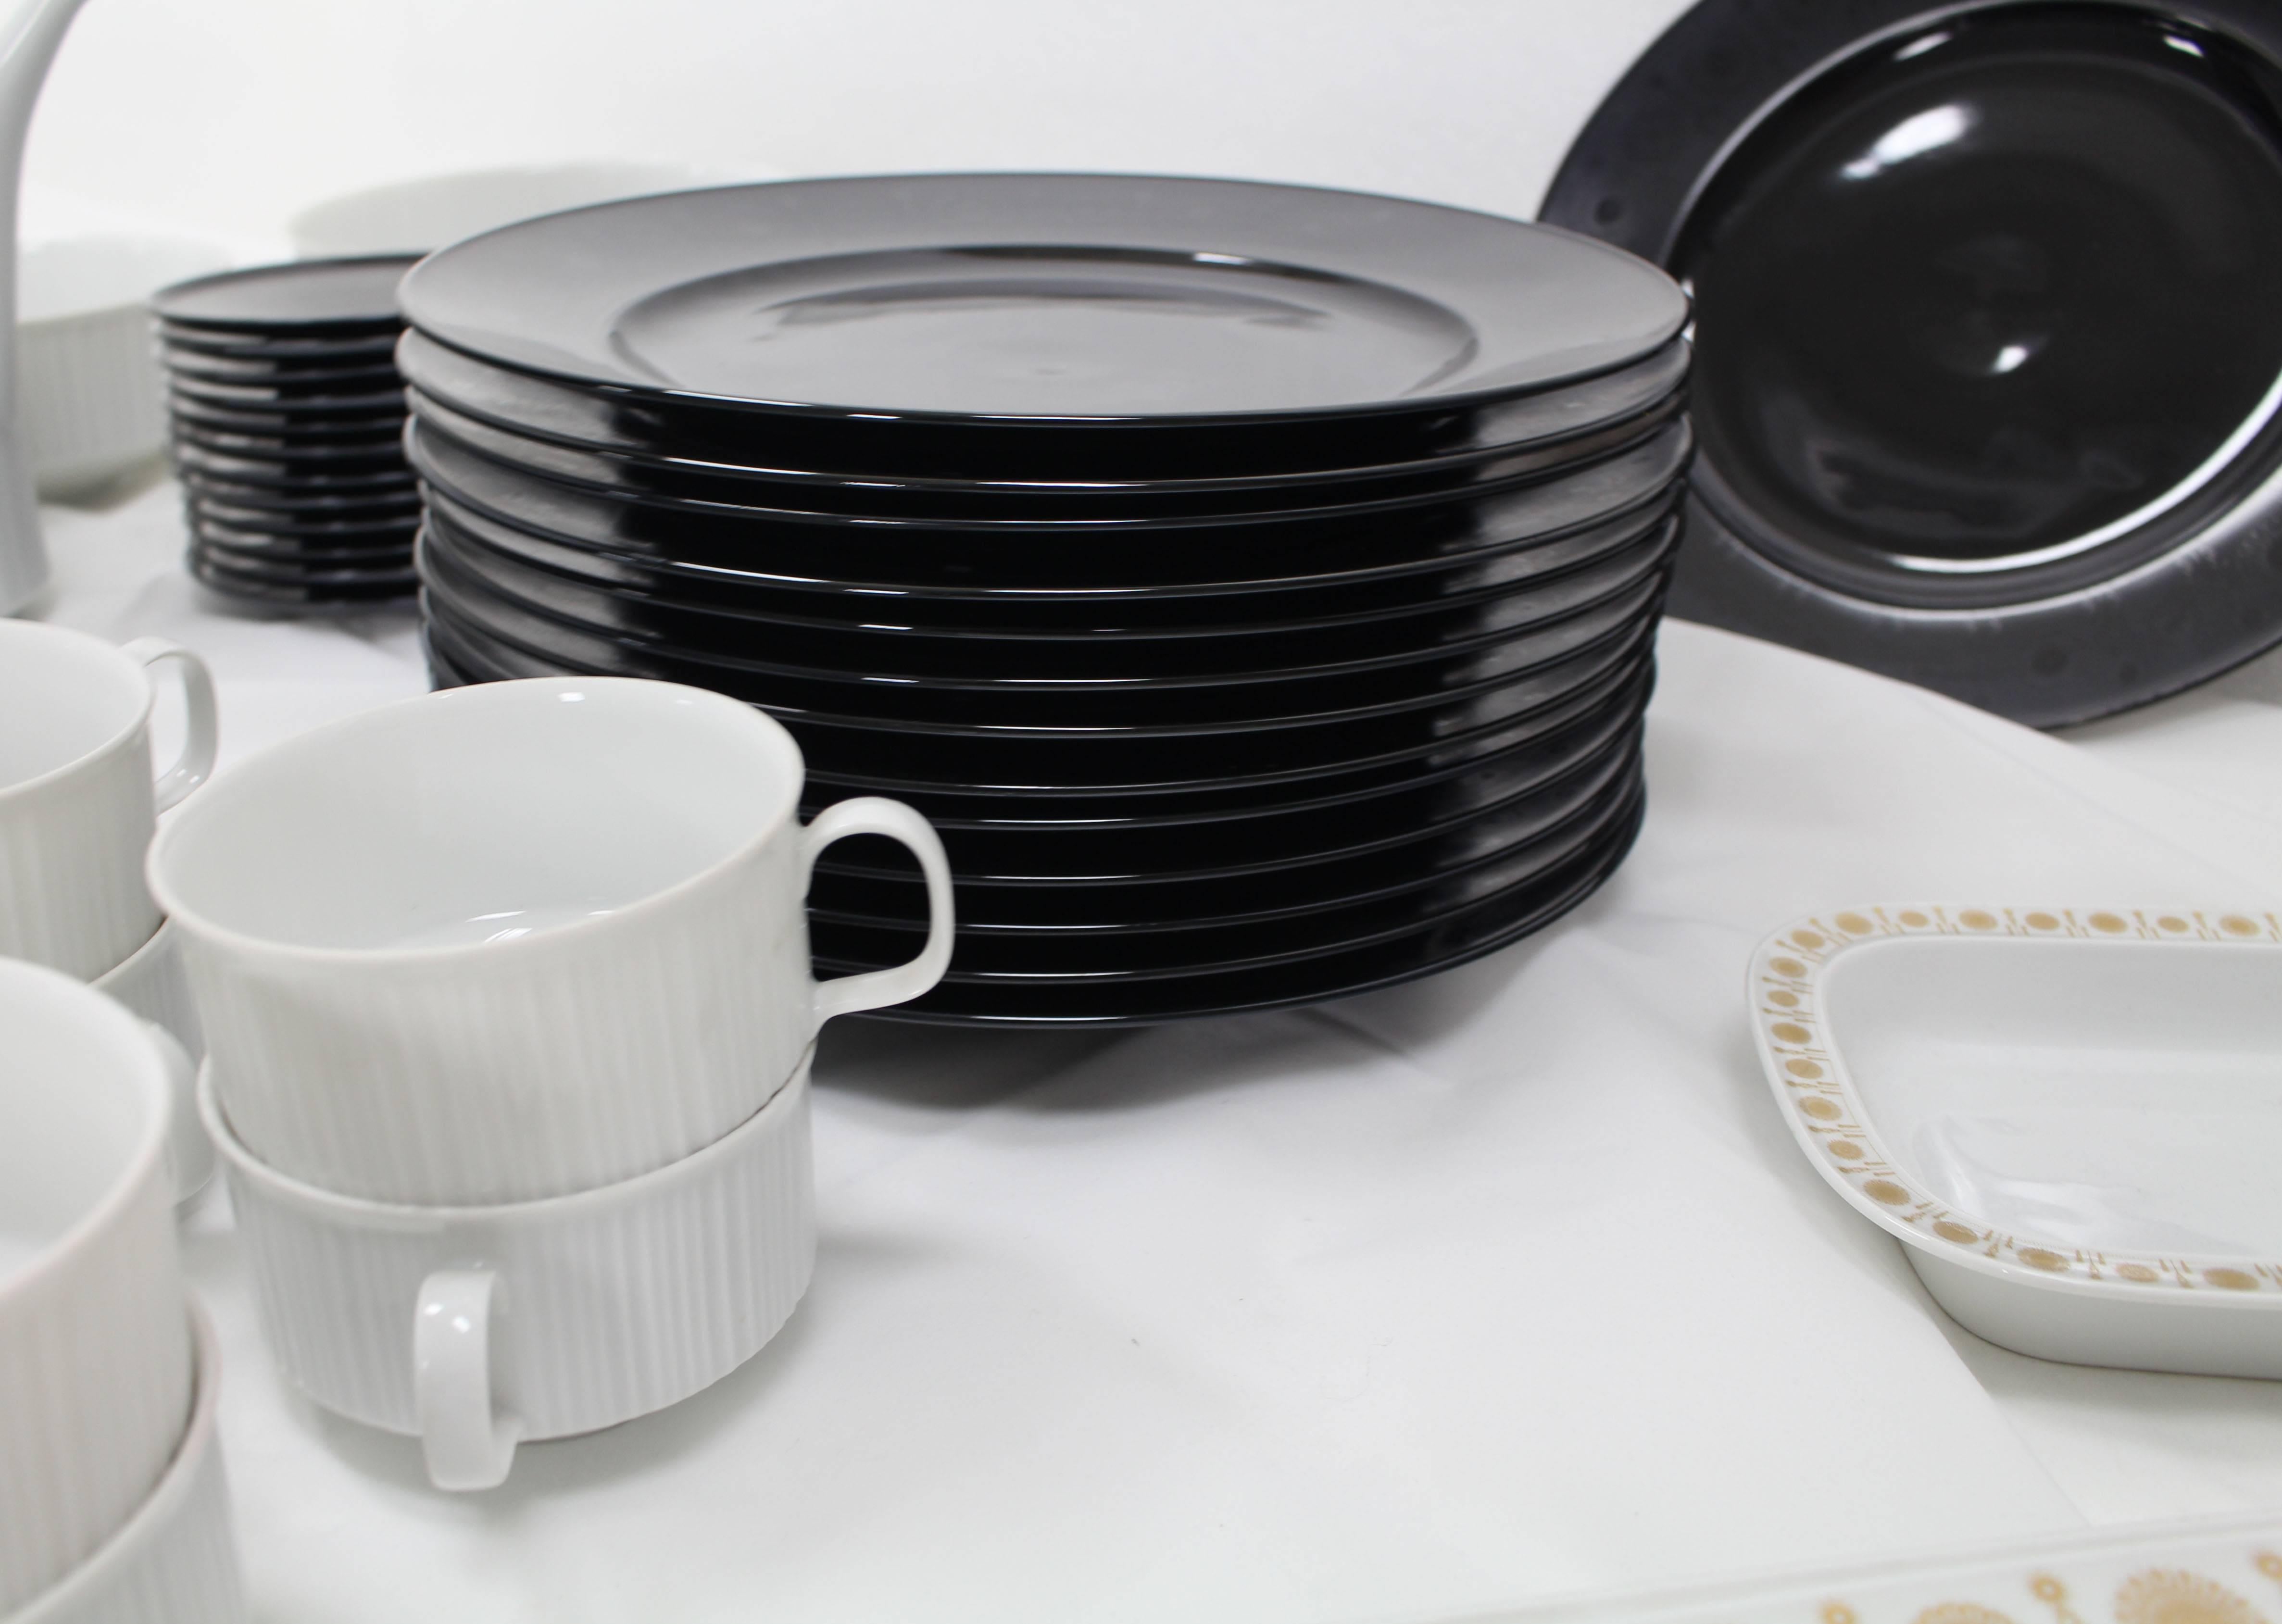 Tapio Wirkkala for Rosenthal Dinner Coffee 80 Pieces Set Plates Noire Porcelain In Excellent Condition For Sale In Rockaway, NJ